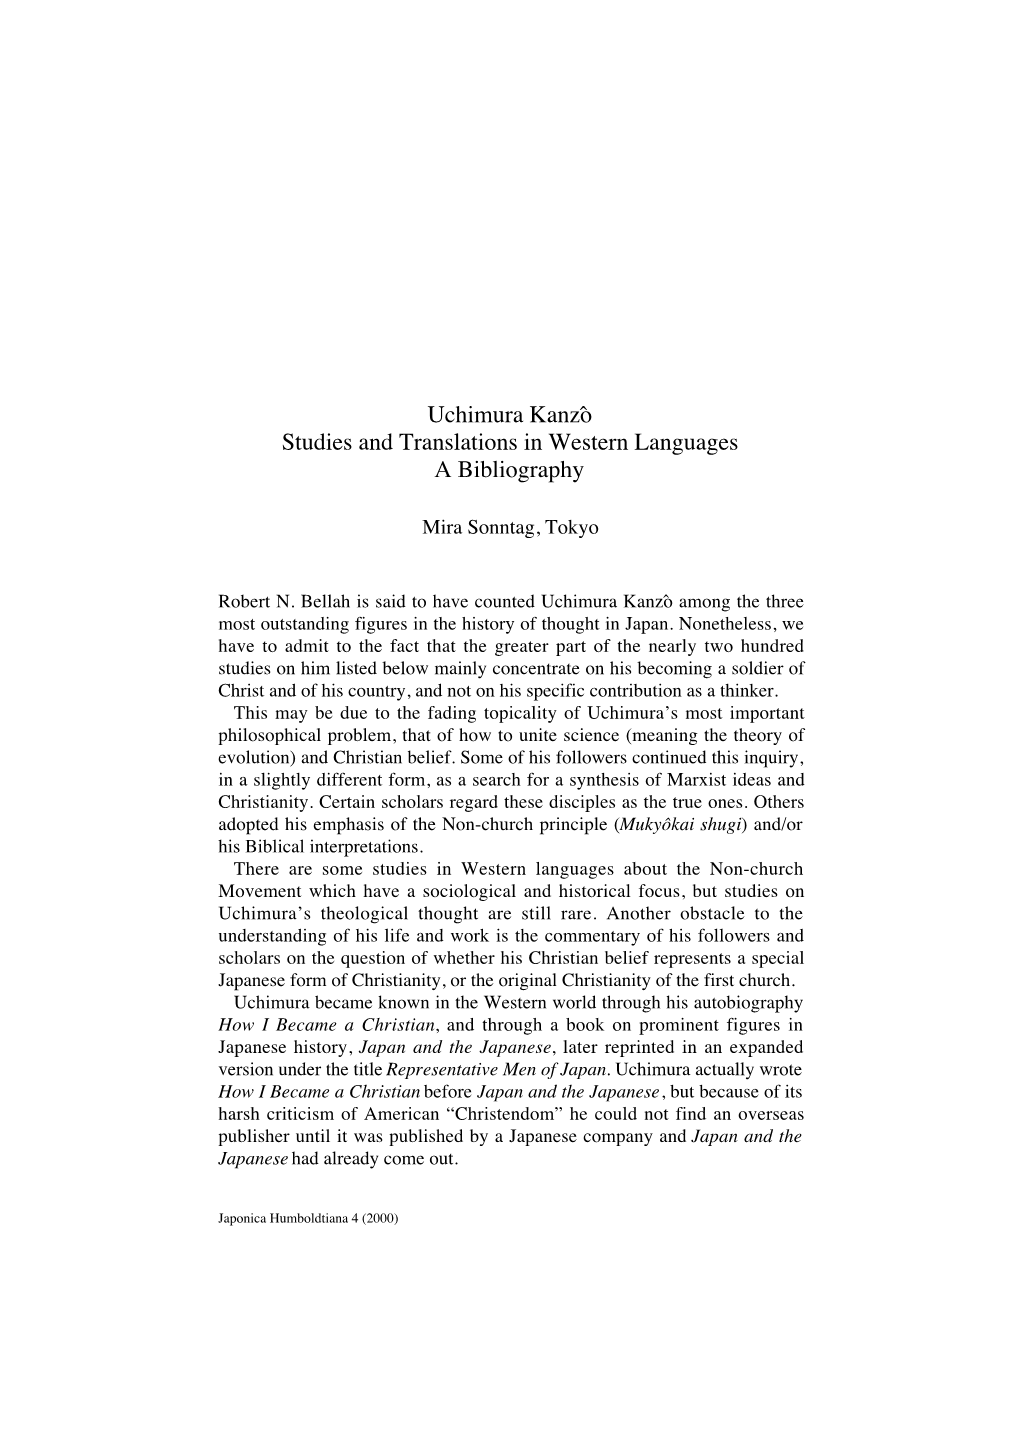 Uchimura Kanzô Studies and Translations in Western Languages. a Bibliography